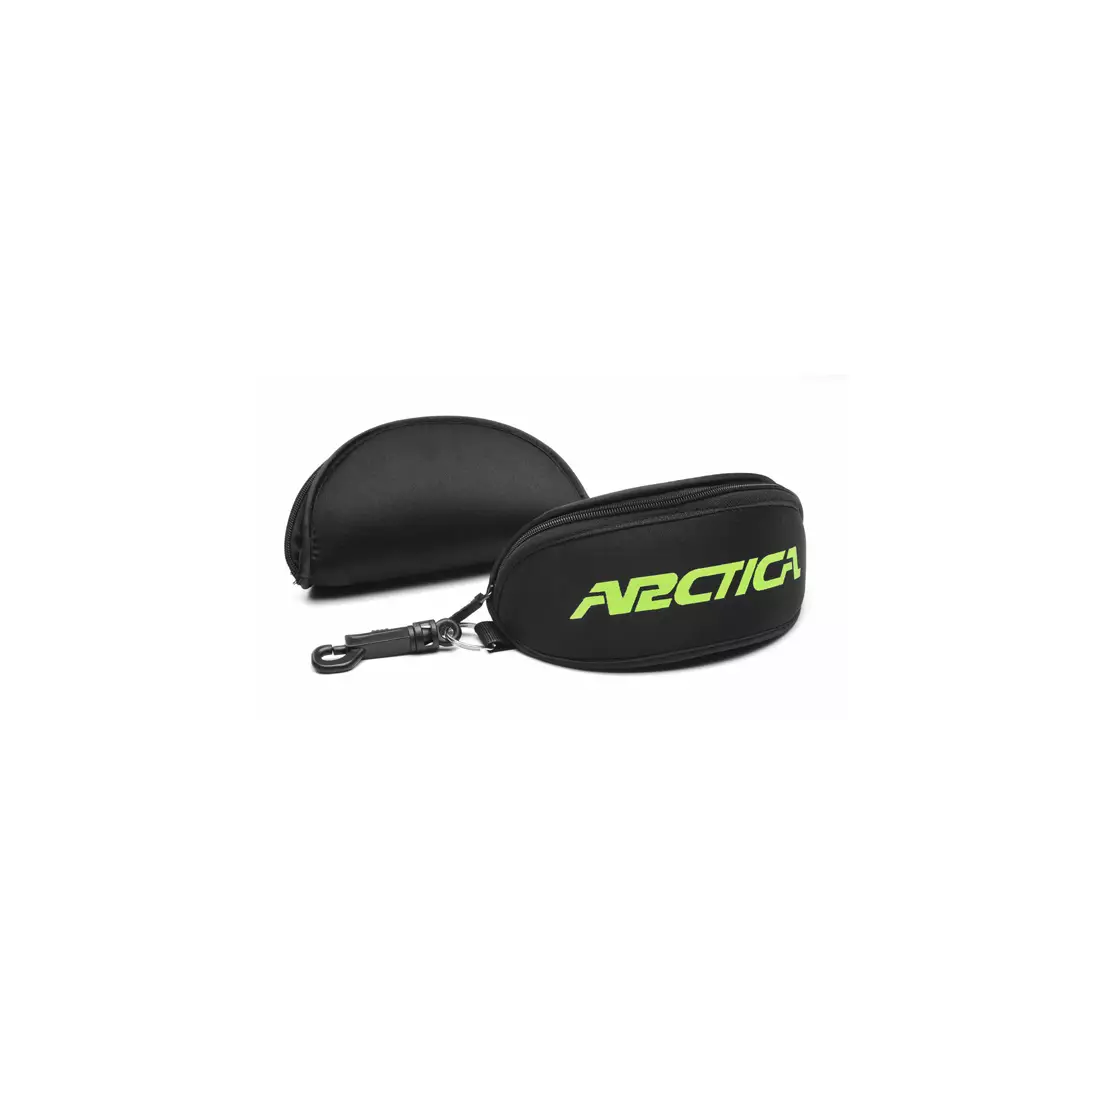 ARCTICA S-285 cycling/sports glasses